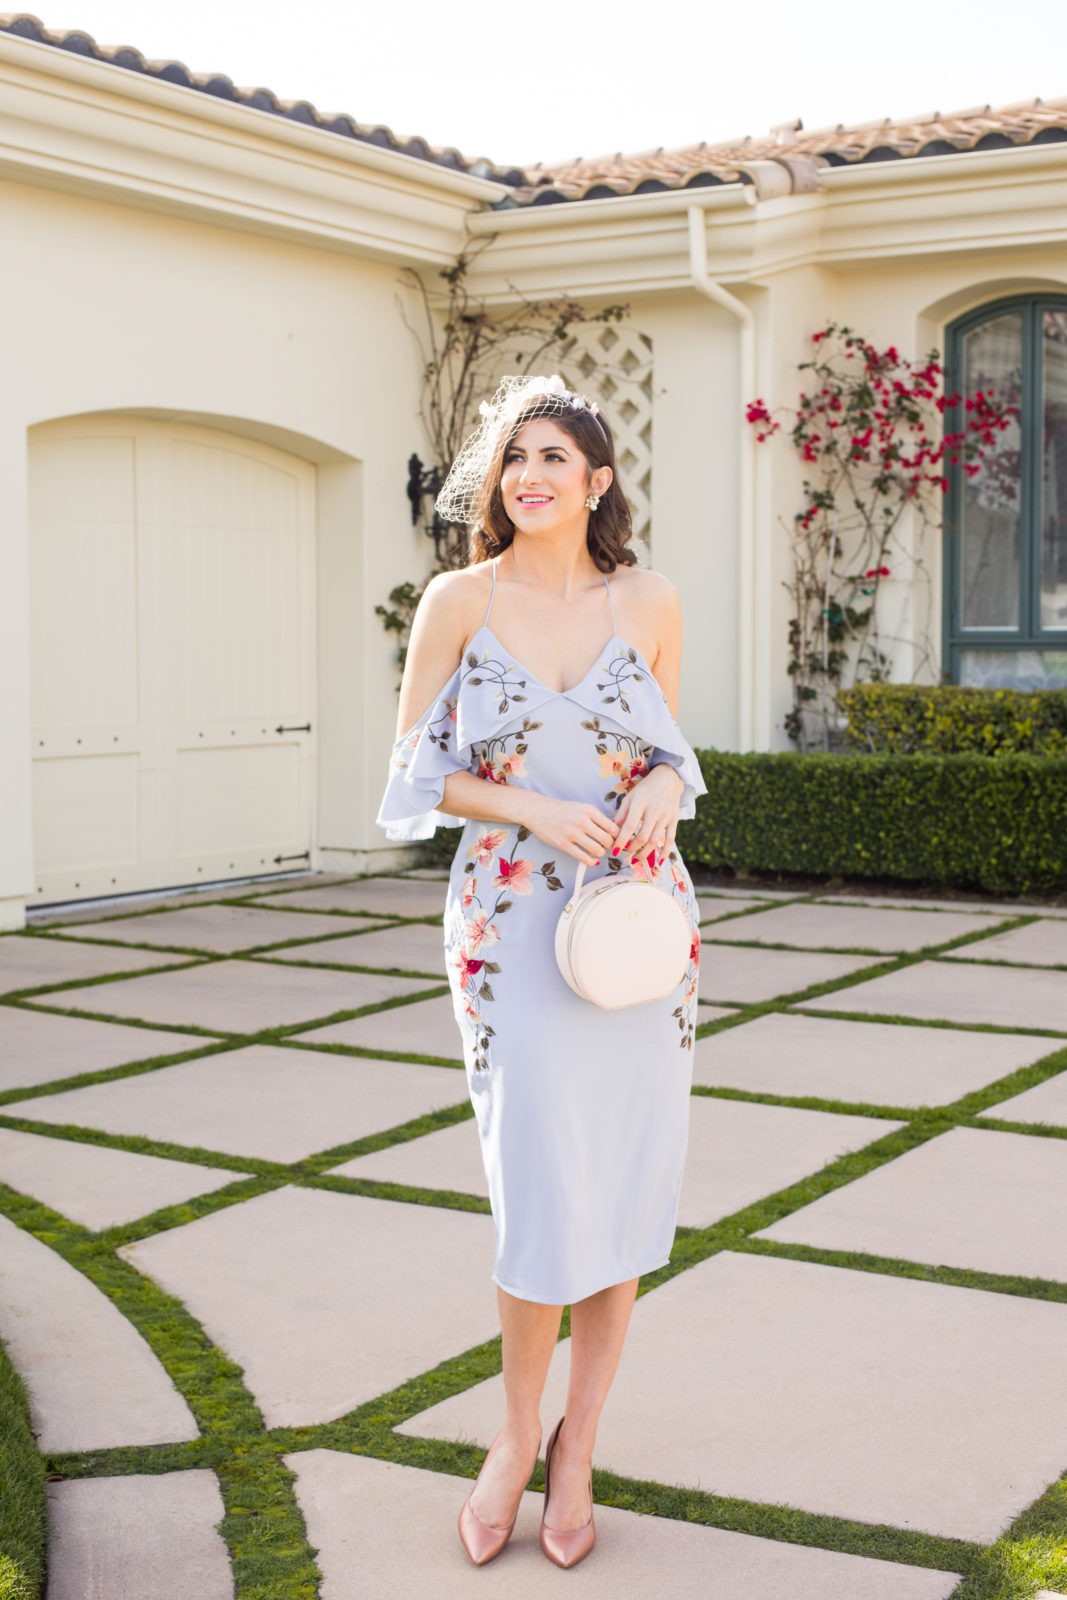 Wedding Guest Style Guide: What To Wear To A Summer Wedding – Pink Boutique  UK